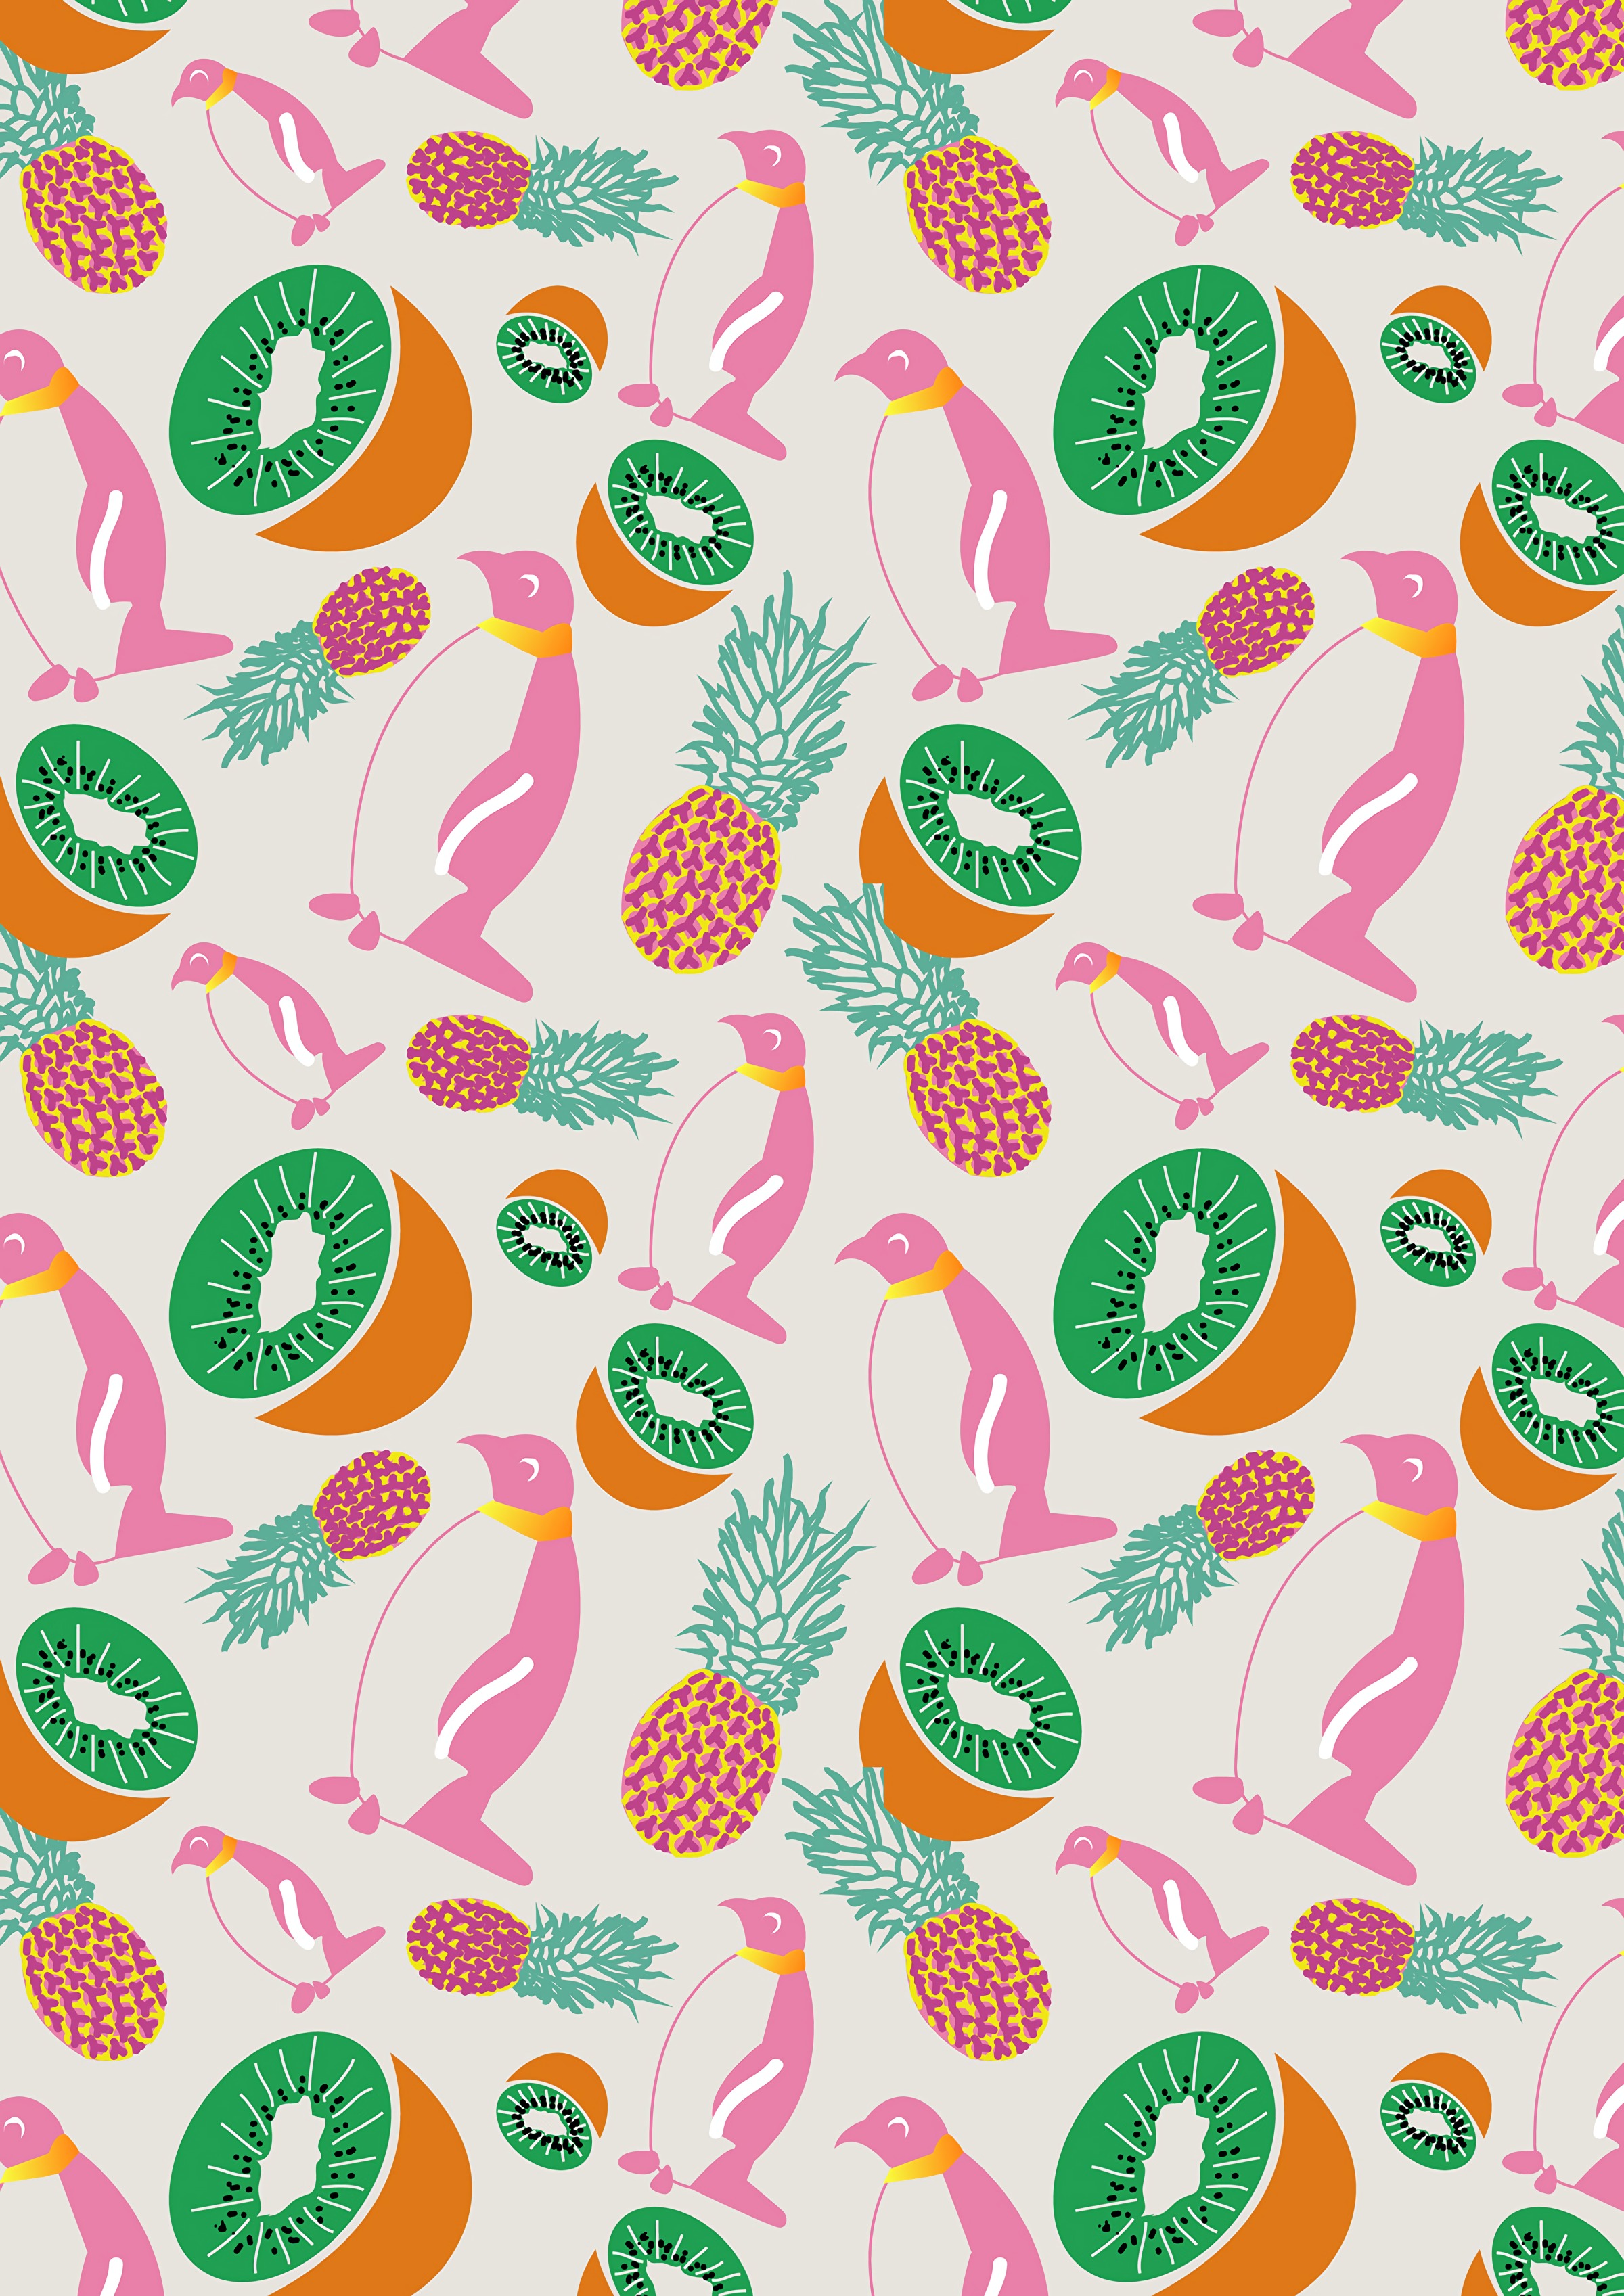 art, pinguins, kiwi, pineapples, pattern, texture, textures wallpaper for mobile